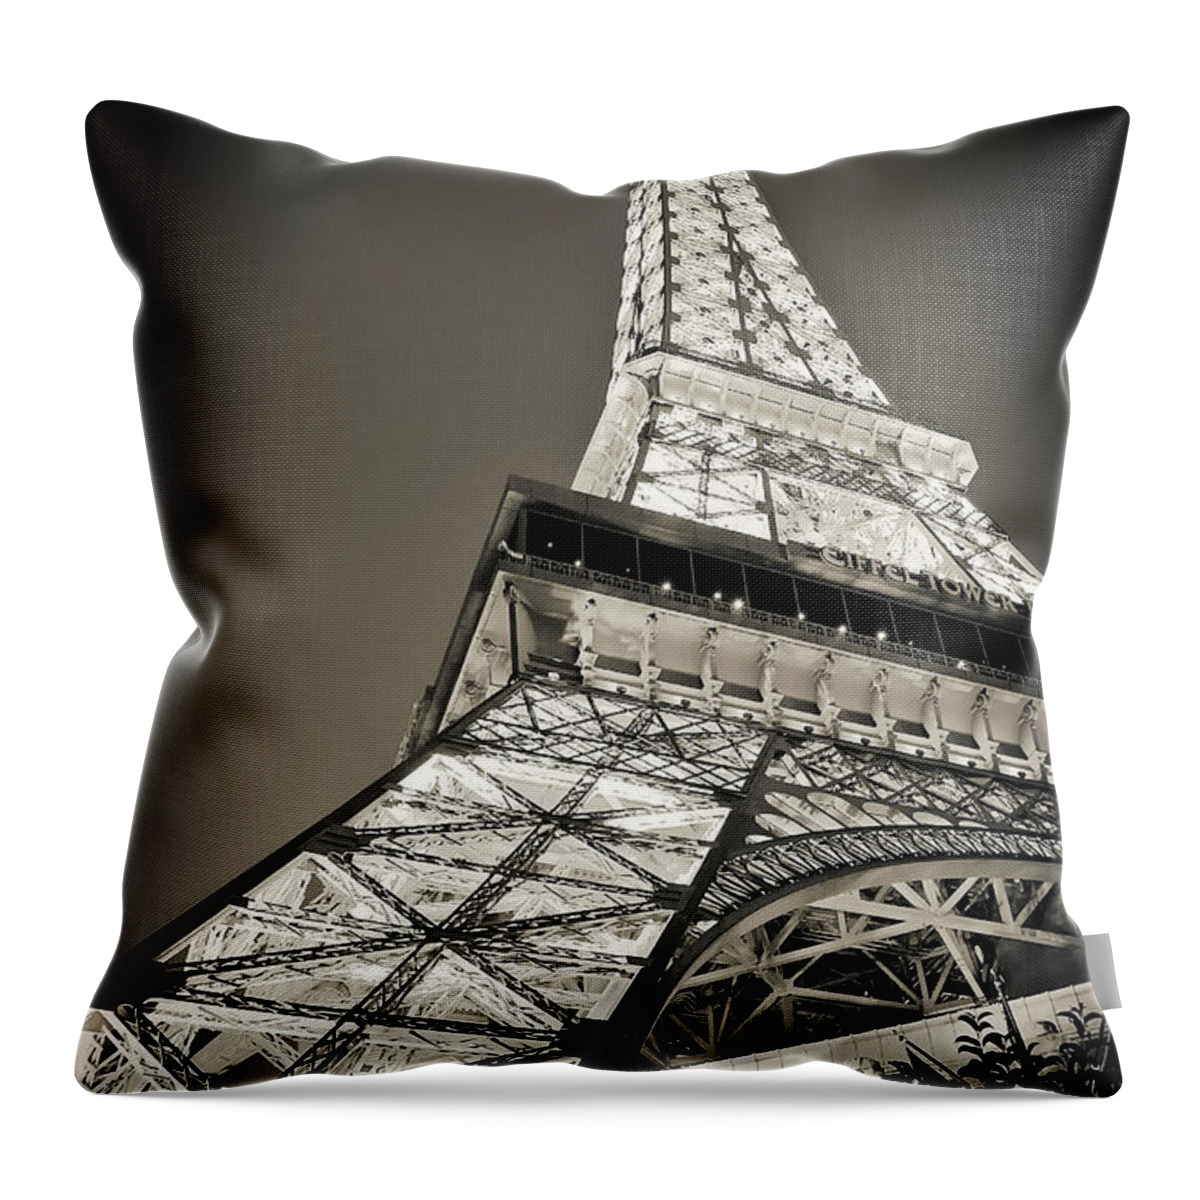 Coloured Photo Of Paris Las Vegas Half Scale (541 Ft/165 M Tall) Replica Of The Eiffel Tower. Like It's Full Scale Inspiration Tower This One Has A Restaurant And Observation Floor. Location: Las Vegas Blvd Throw Pillow featuring the photograph Eiffel Tower Paris Las Vegas #1 by Kate McKenna